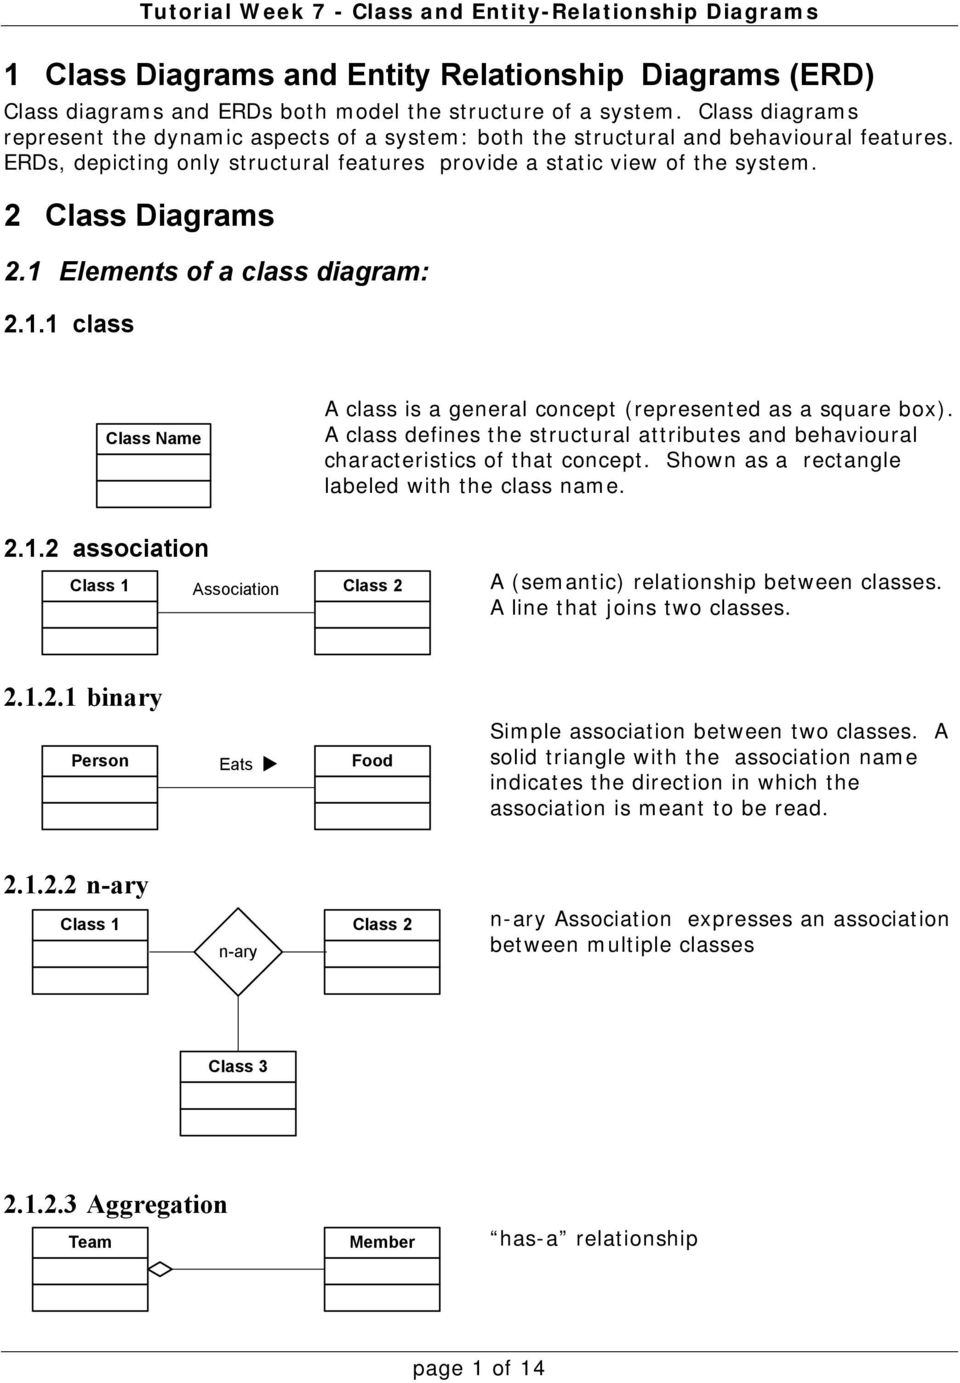 1 Class Diagrams And Entity Relationship Diagrams (Erd throughout Er Diagram Has A Relationship